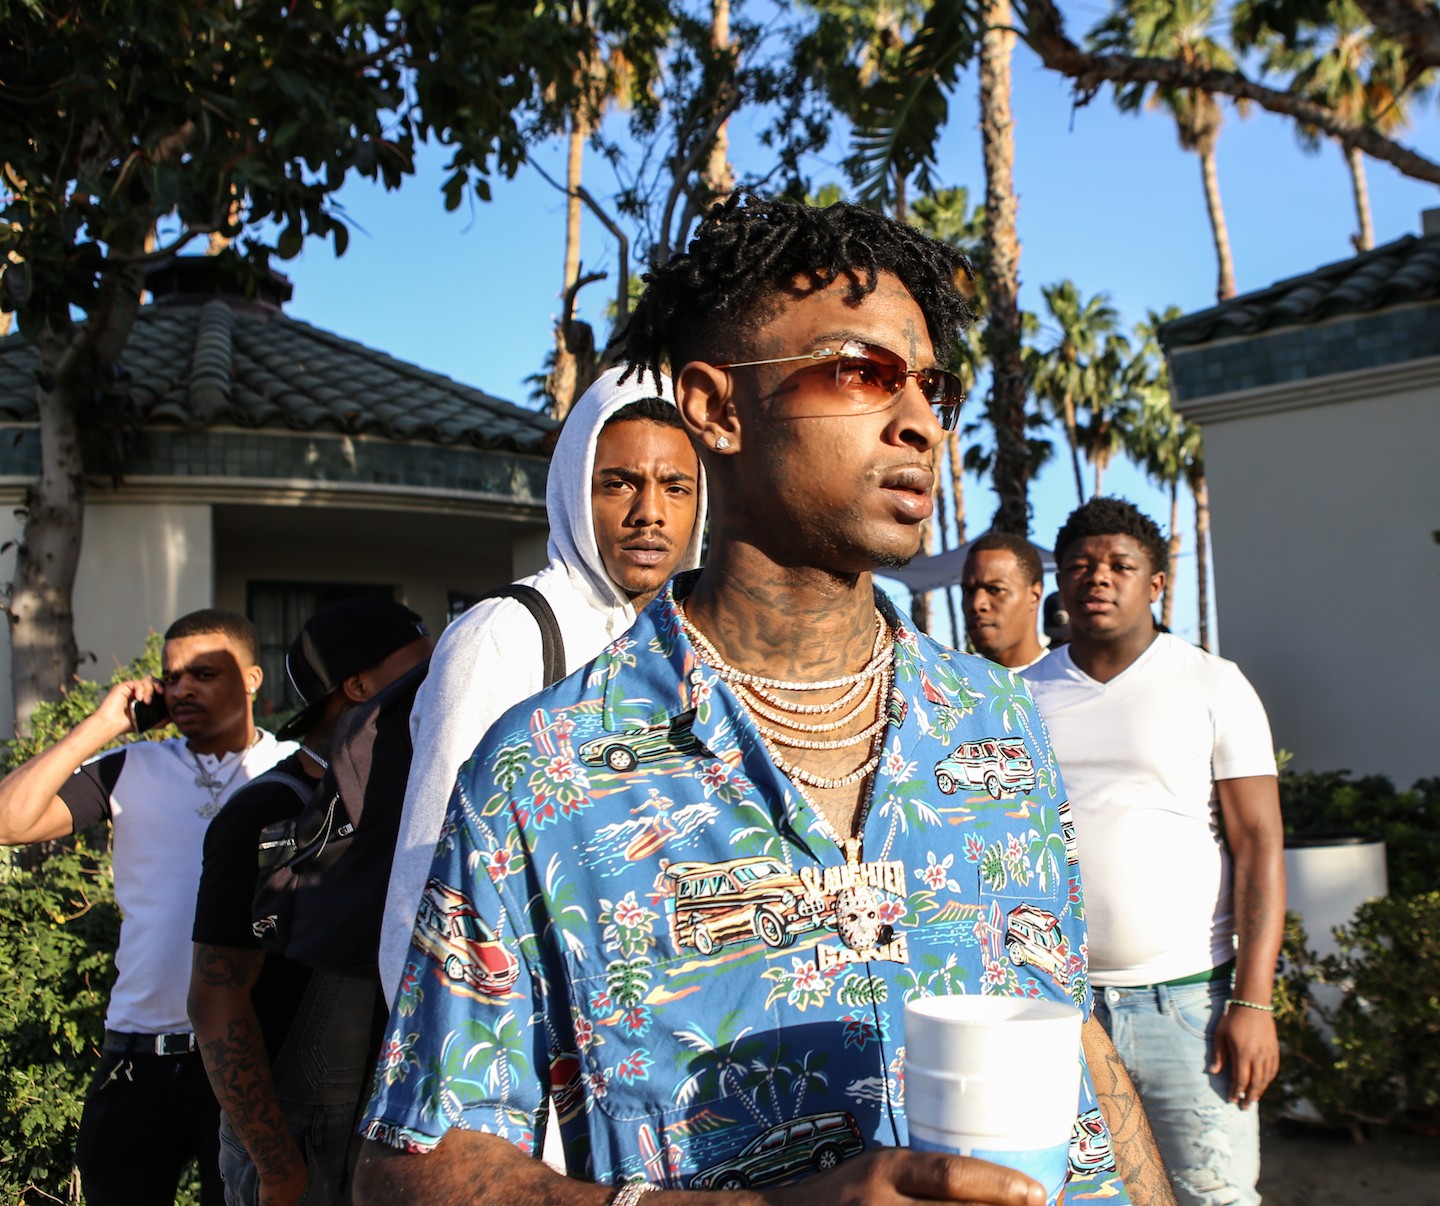 21 Savage Says 'Her Loss' Album Wasn't Pushed Back After Takeoff's